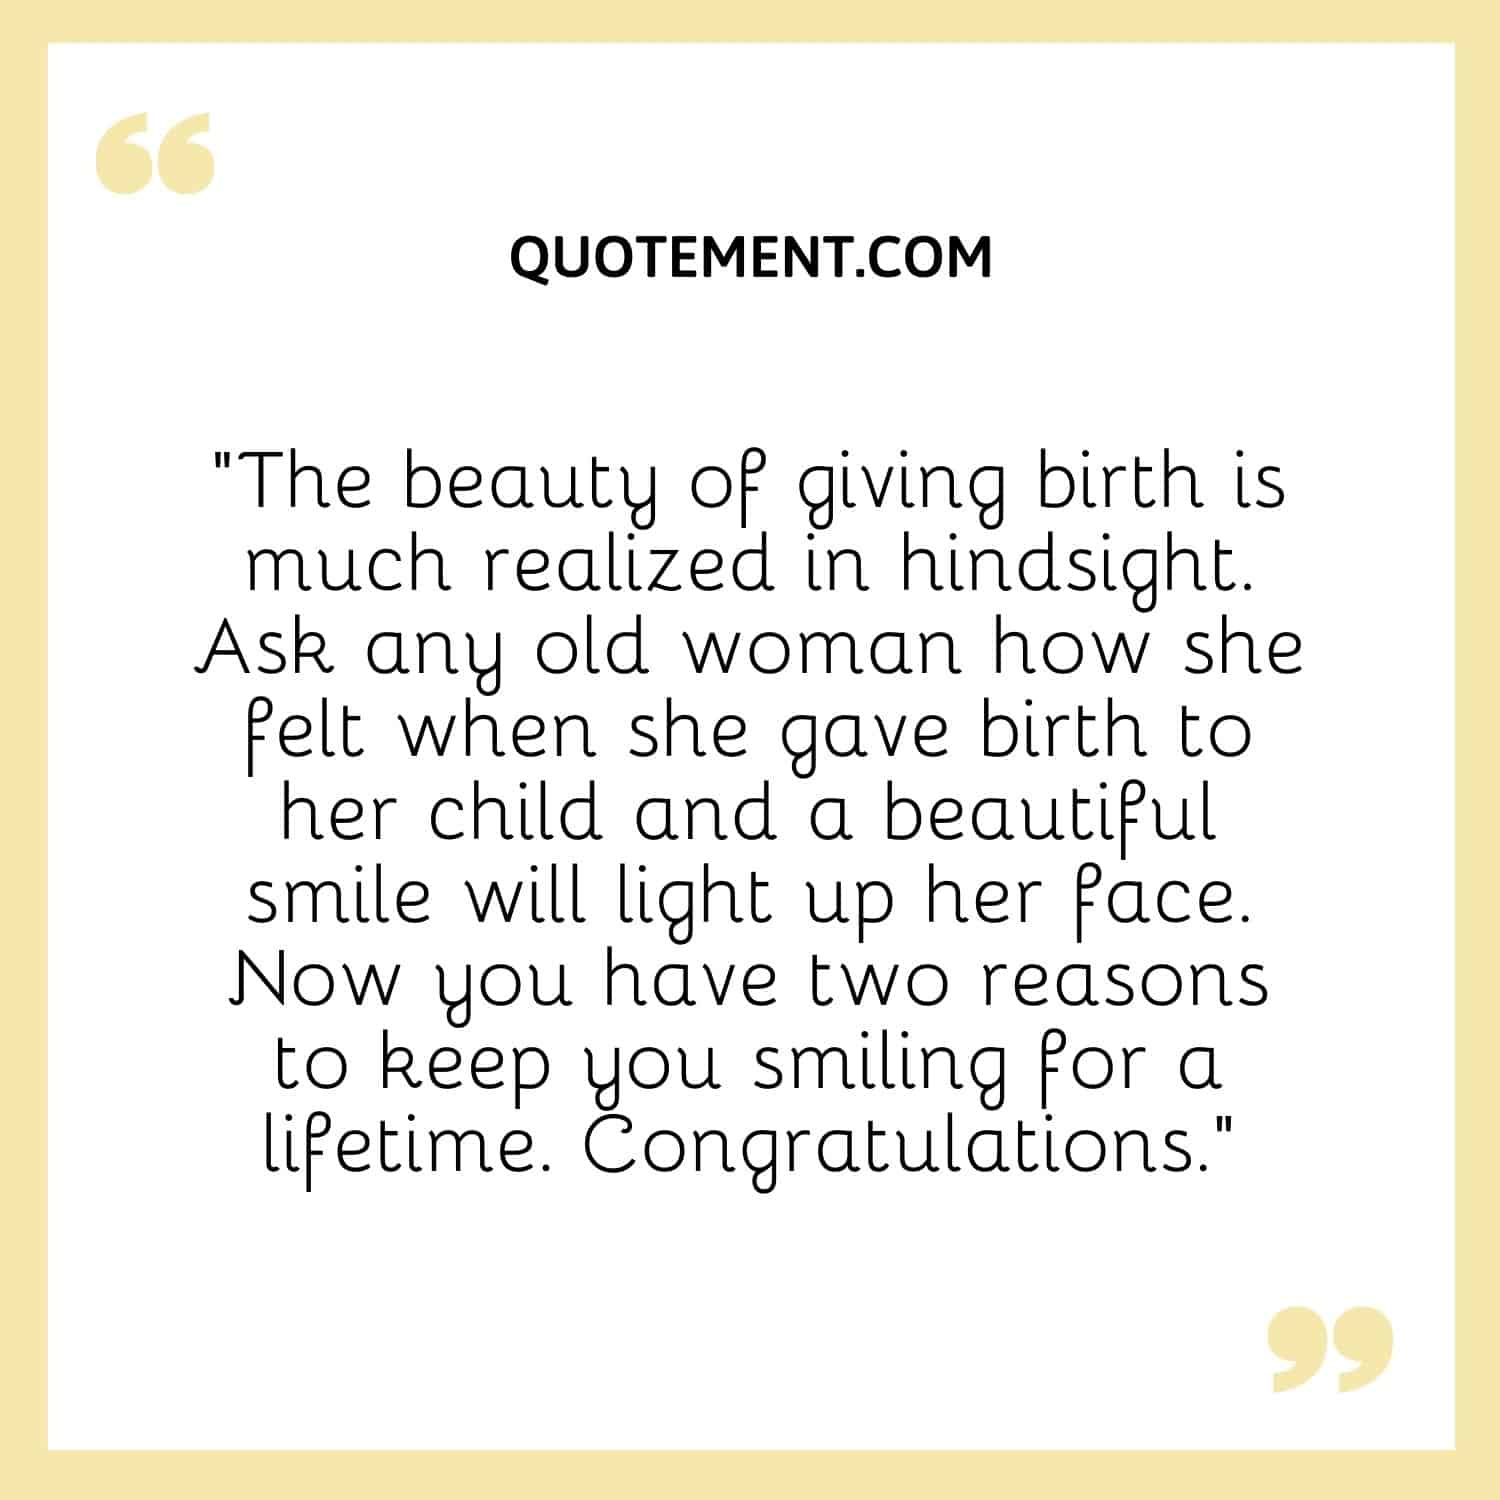 The beauty of giving birth is much realized in hindsight.